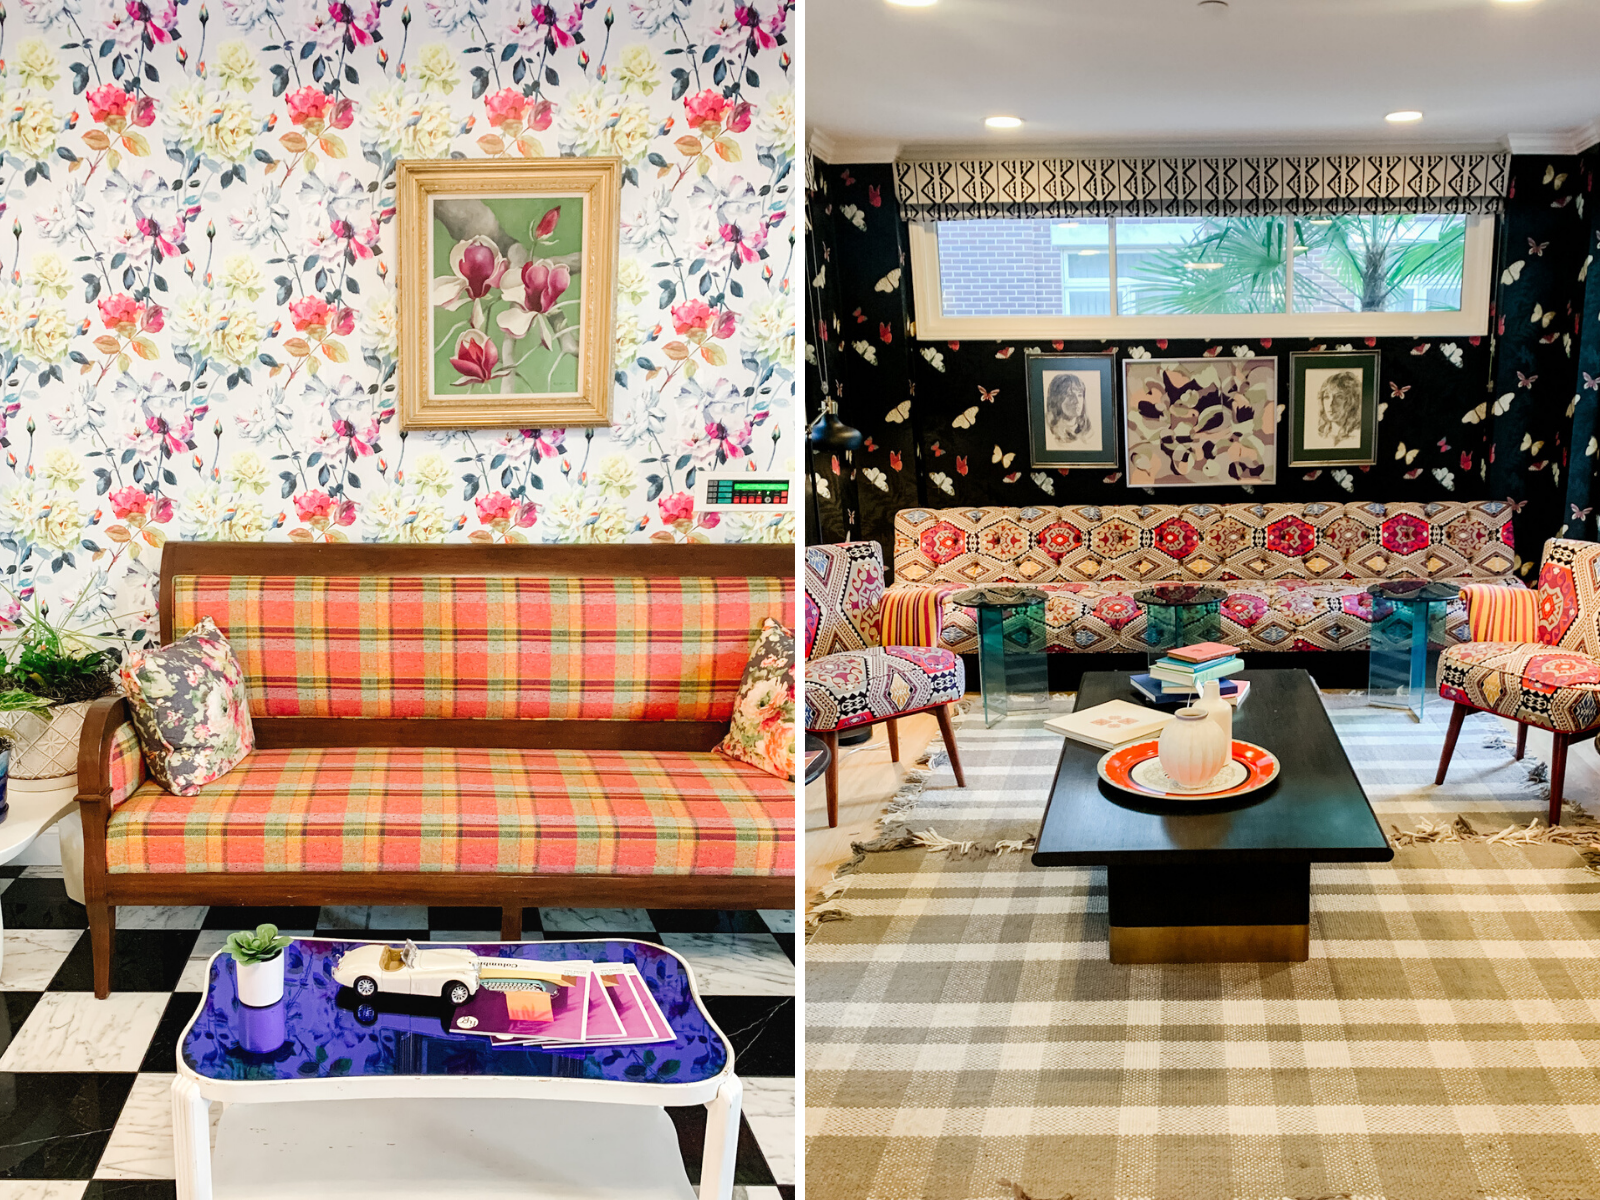 Things to do in Columbia SC by popular Memphis travel blog, Lone Star Looking Glass: image of a plaid couch and floral wallpaper at the Graduate hotel in Columbia SC.